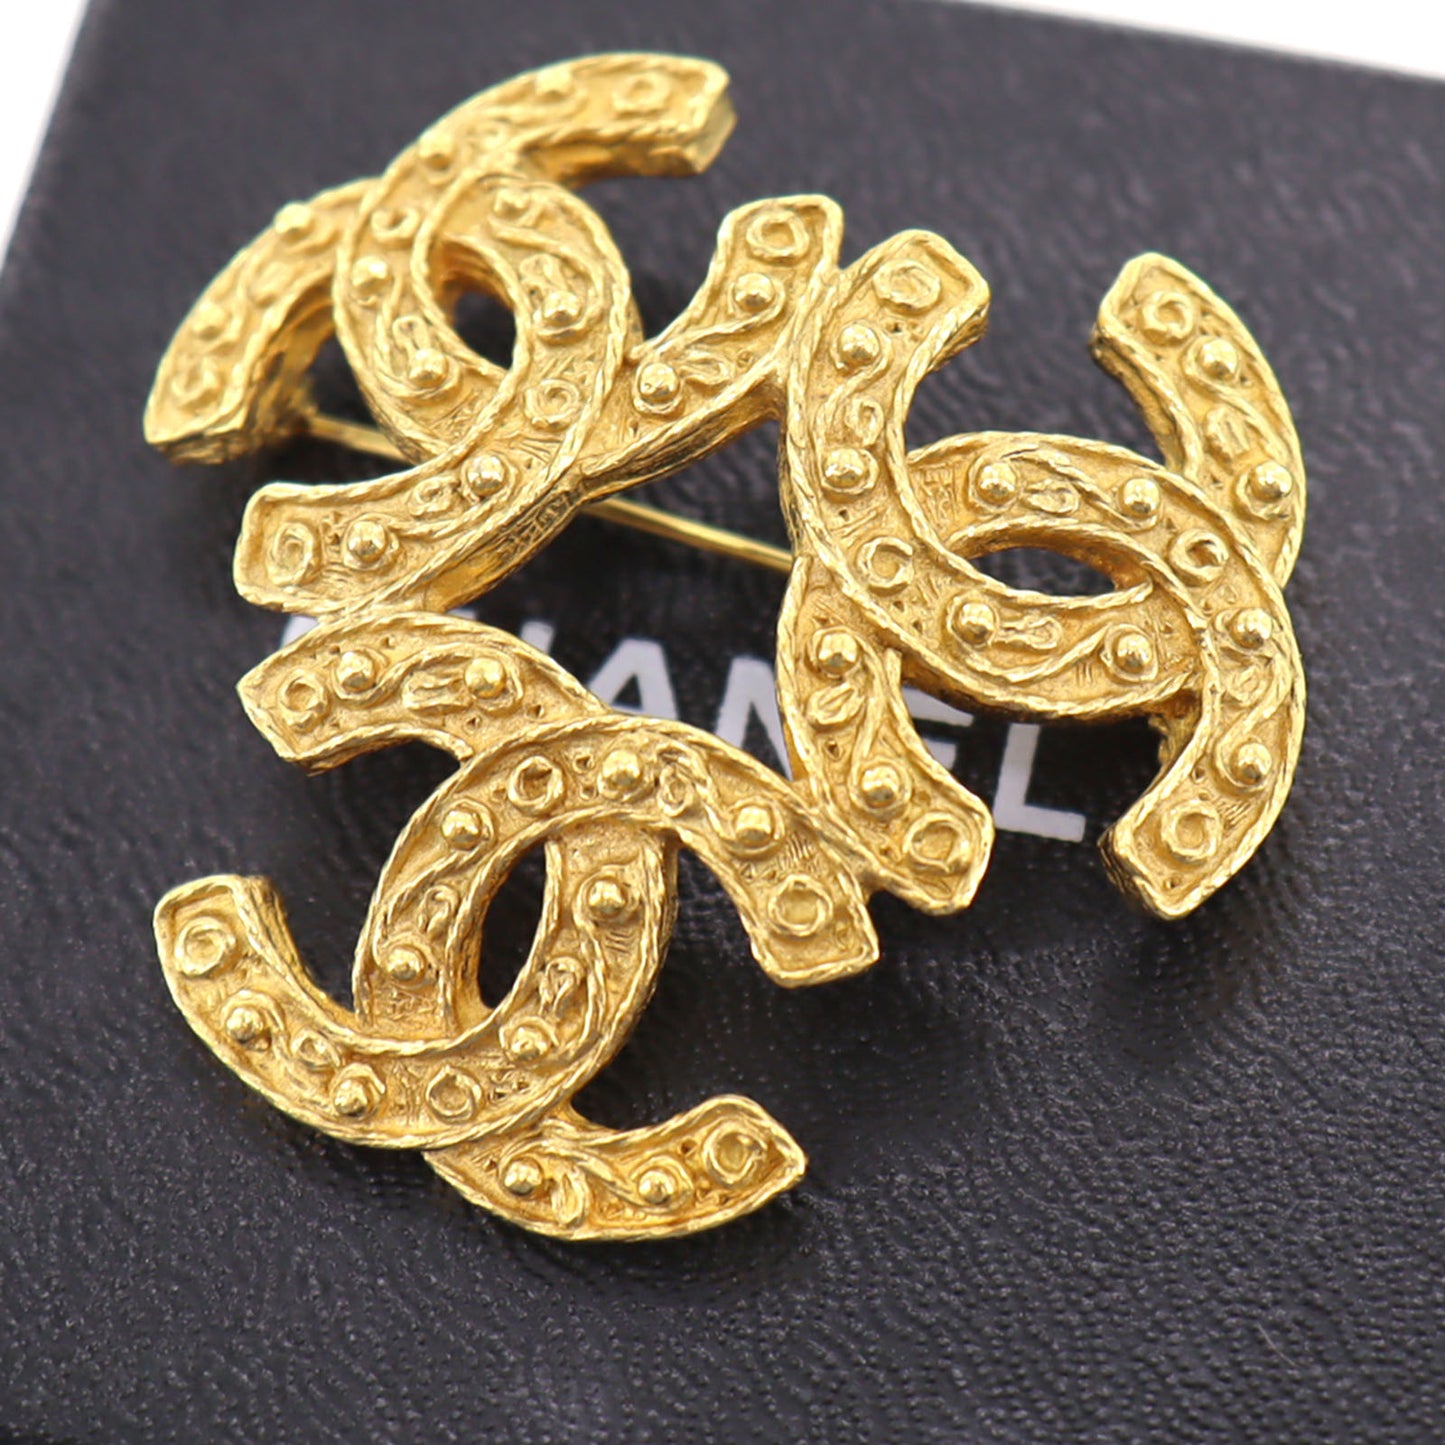 CHANEL Triple CC Logos Used Pin Brooch Gold Plated 94A France